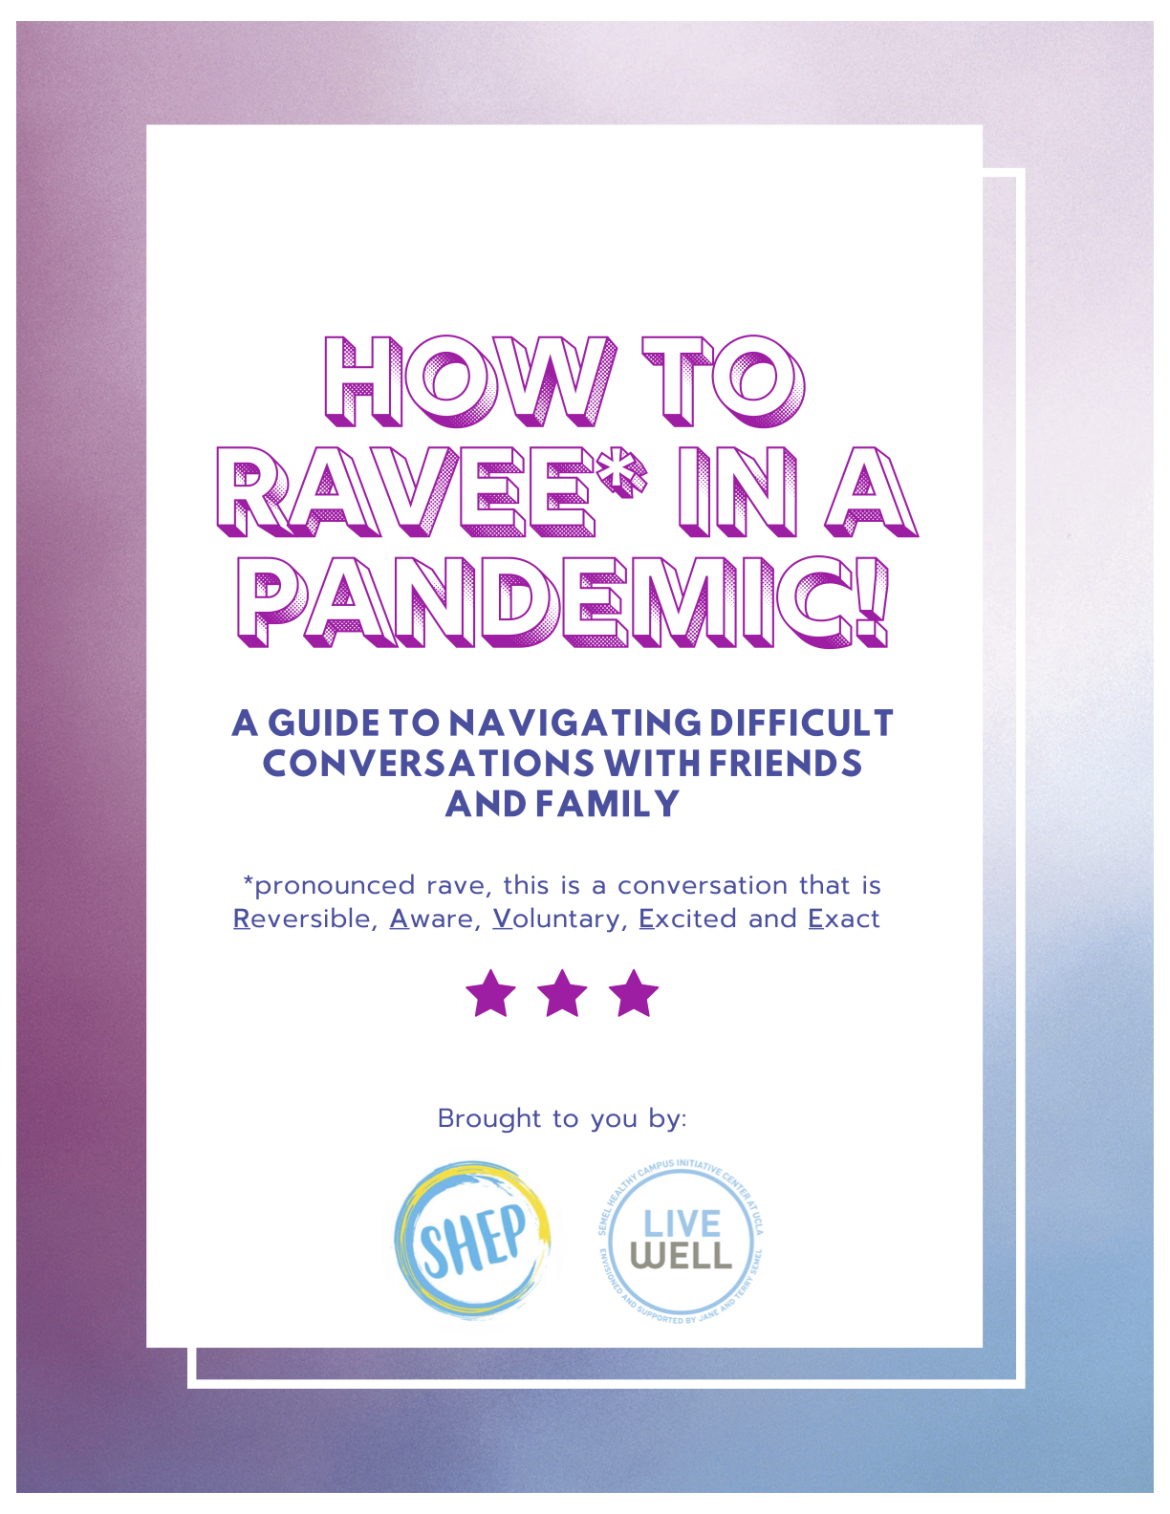 How to RAVEE* in a Pandemic